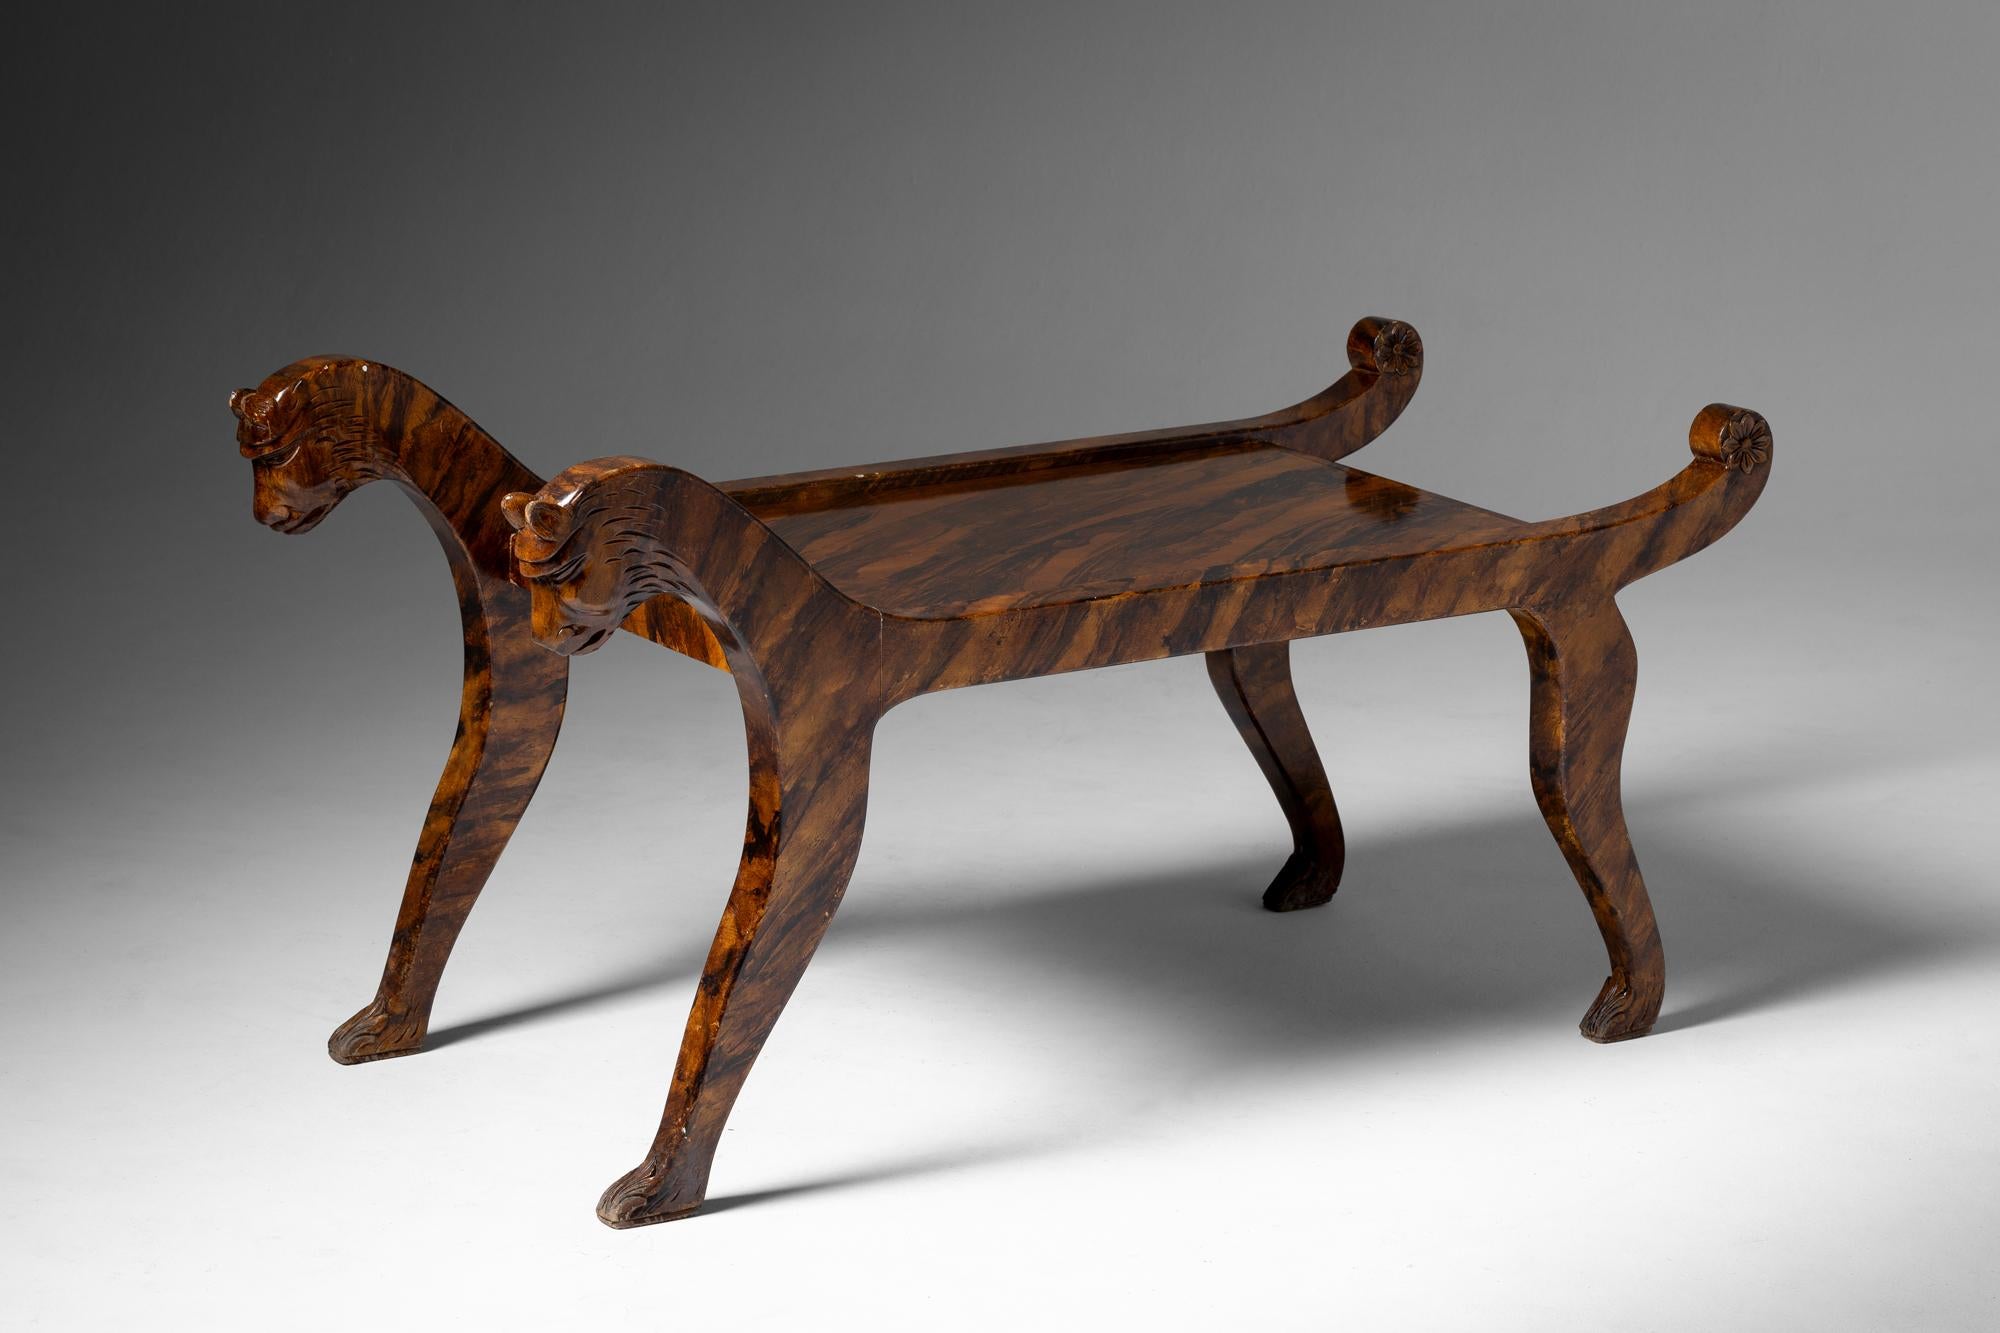 This exotic Tiger Myrtle Wood set the perfect imaginary for creating this bespoke piece of a Tiger shaped table.

Mexican Tiger Myrtle tables combine the exotic beauty of Tiger Myrtle wood with the vibrant colors and craftsmanship of Mexican